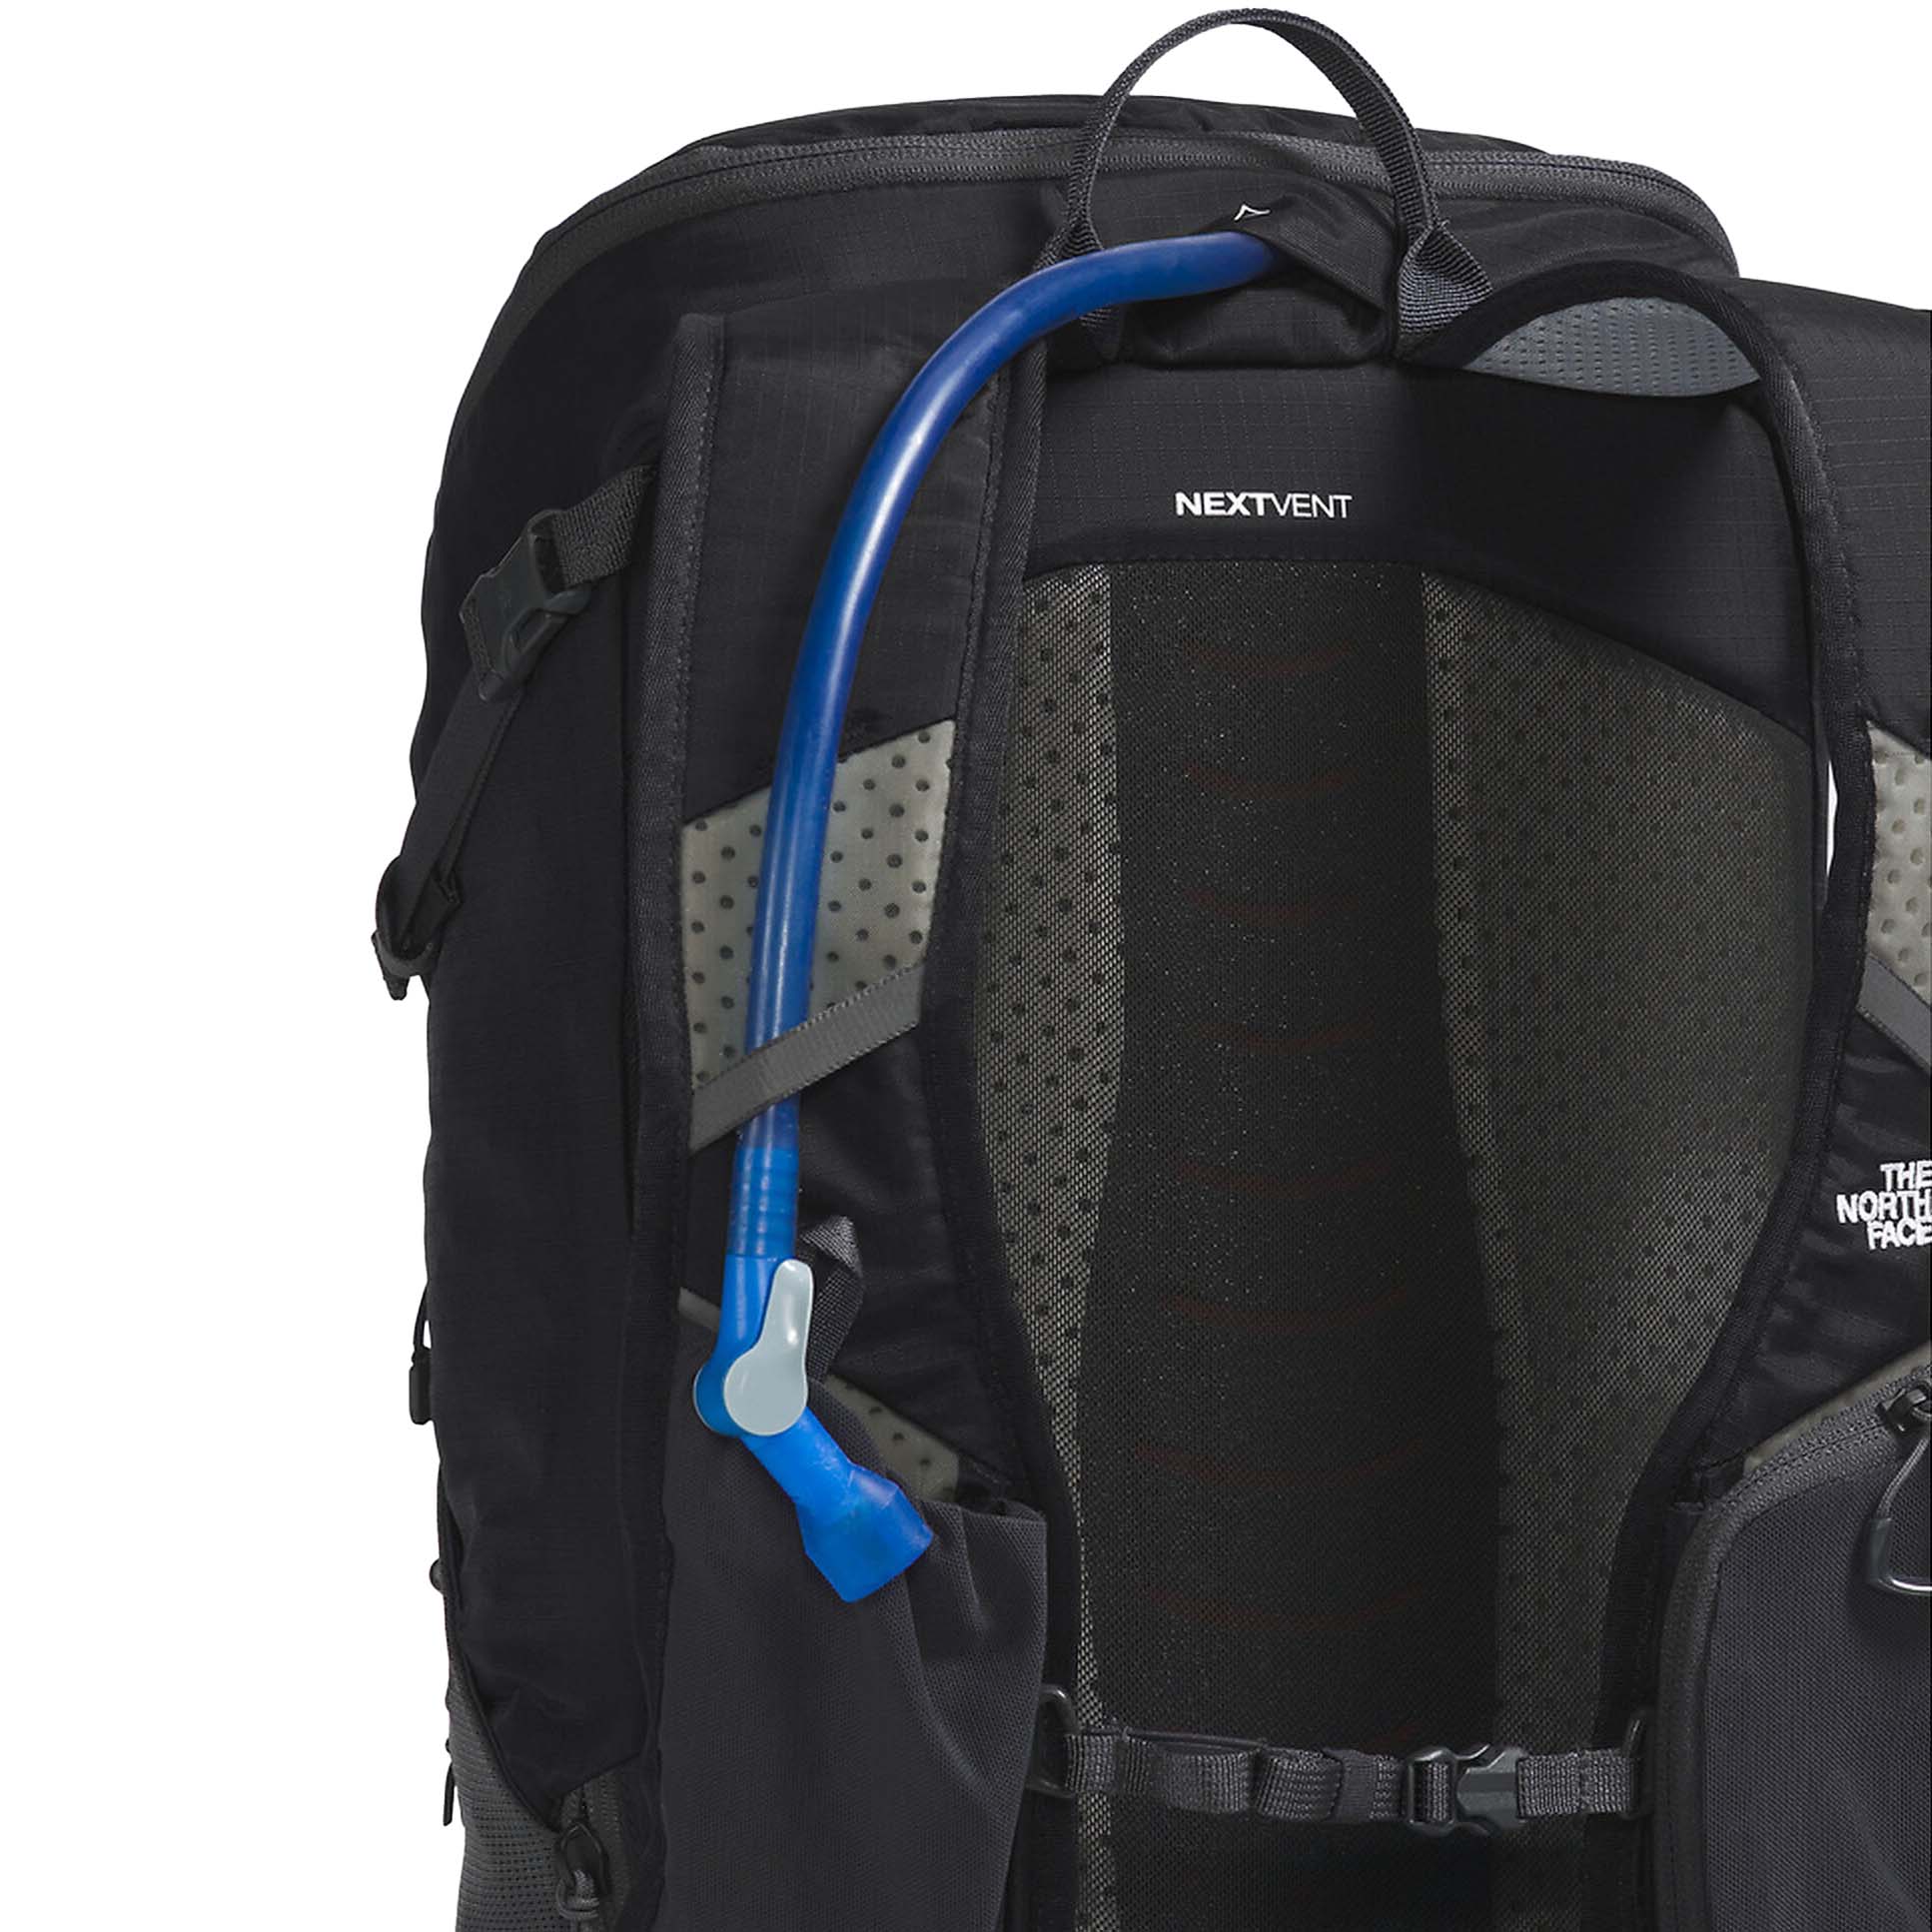 The North Face Trail Lite 24 Backpack/Day Pack